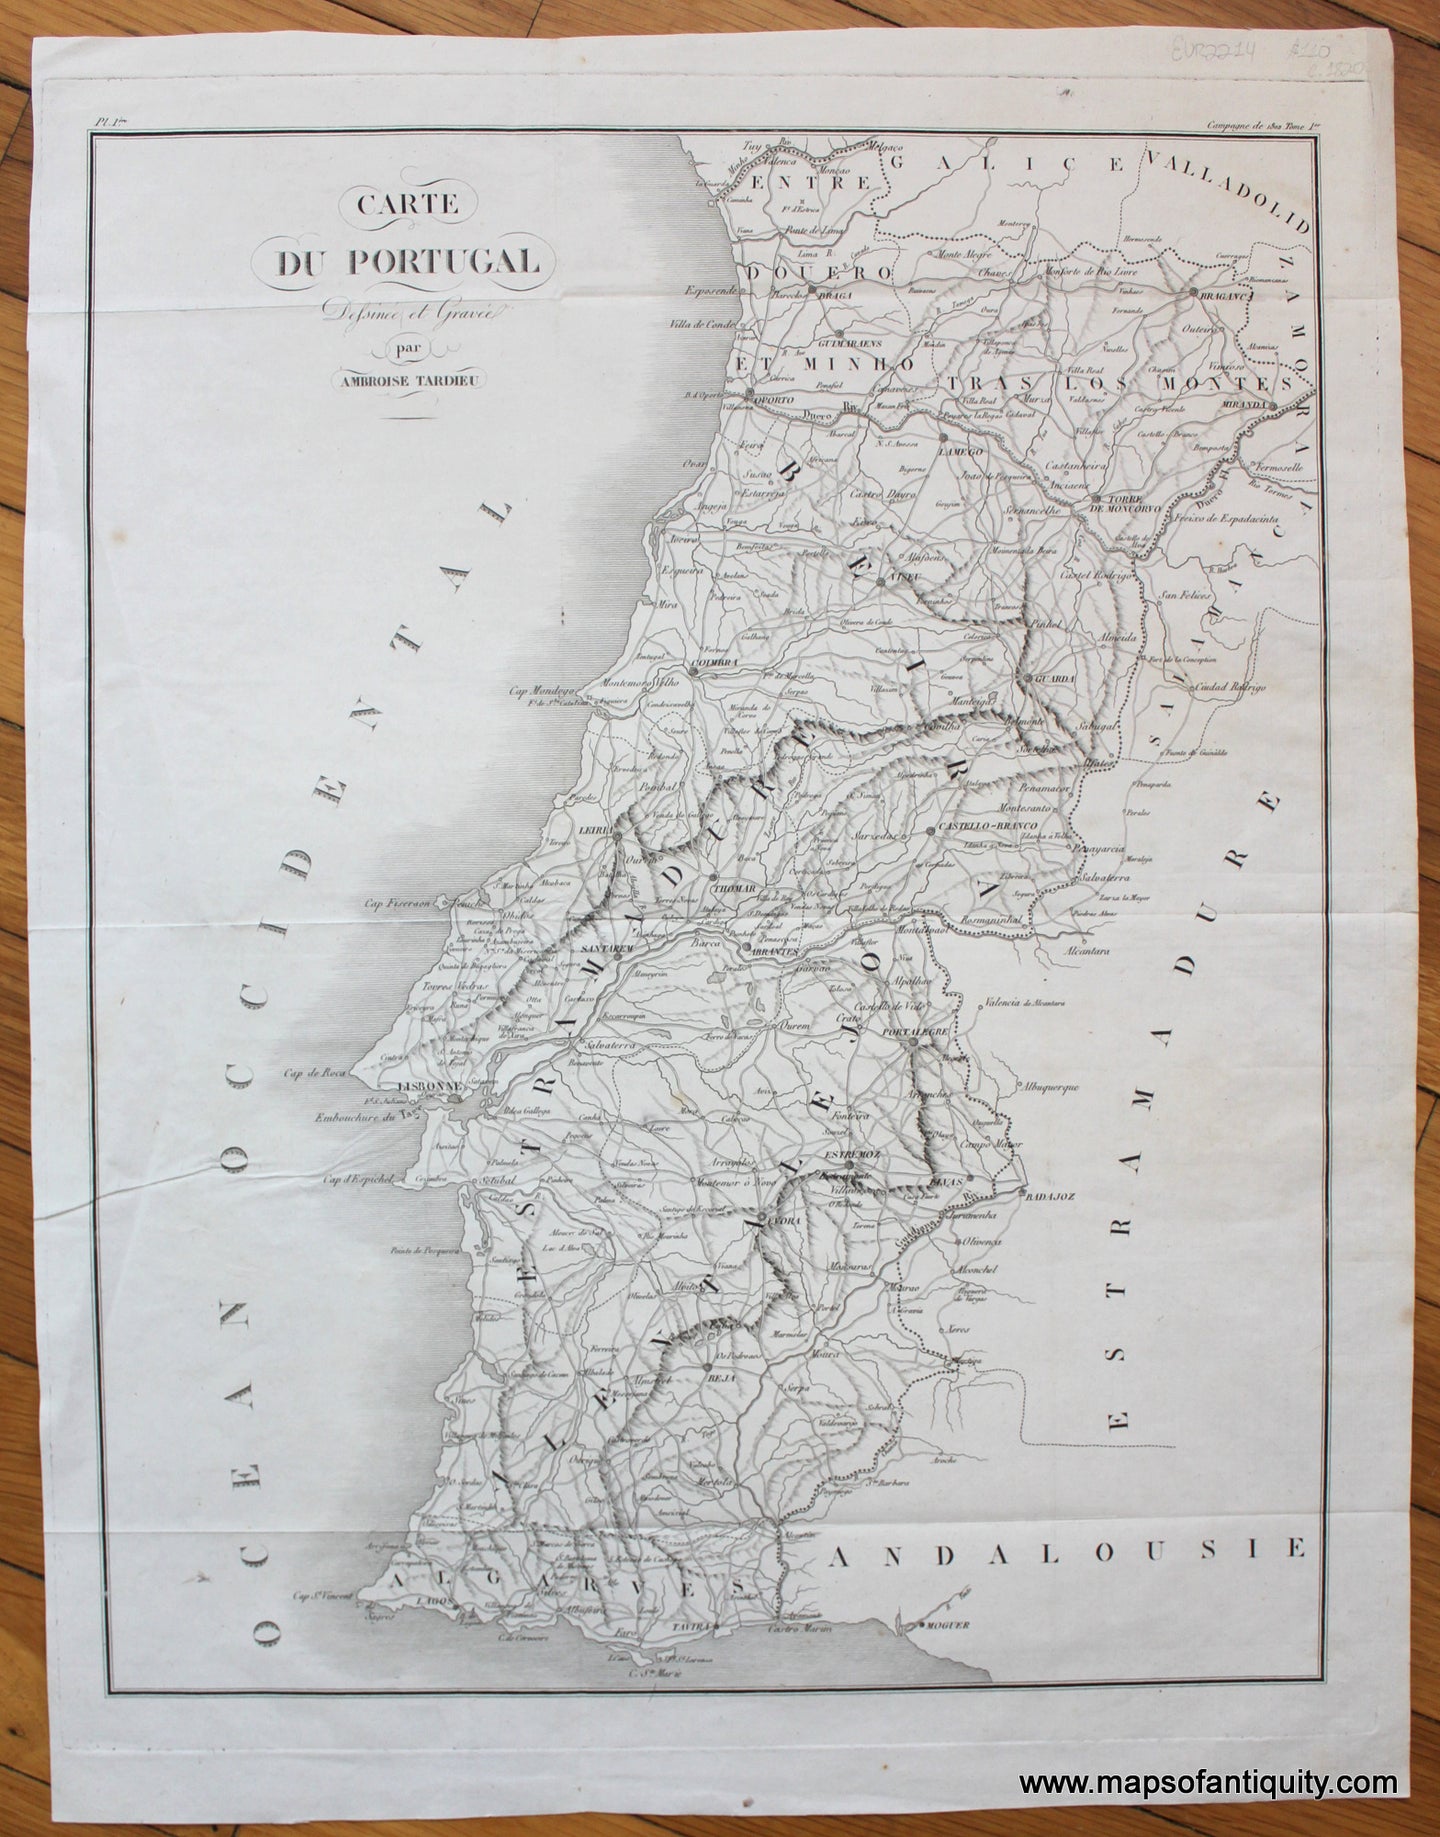 Antique-Map-Carte-Du-Portugal-Tardieu-1820s-1800s-Early-19th-Century-Maps-of-Antiquity